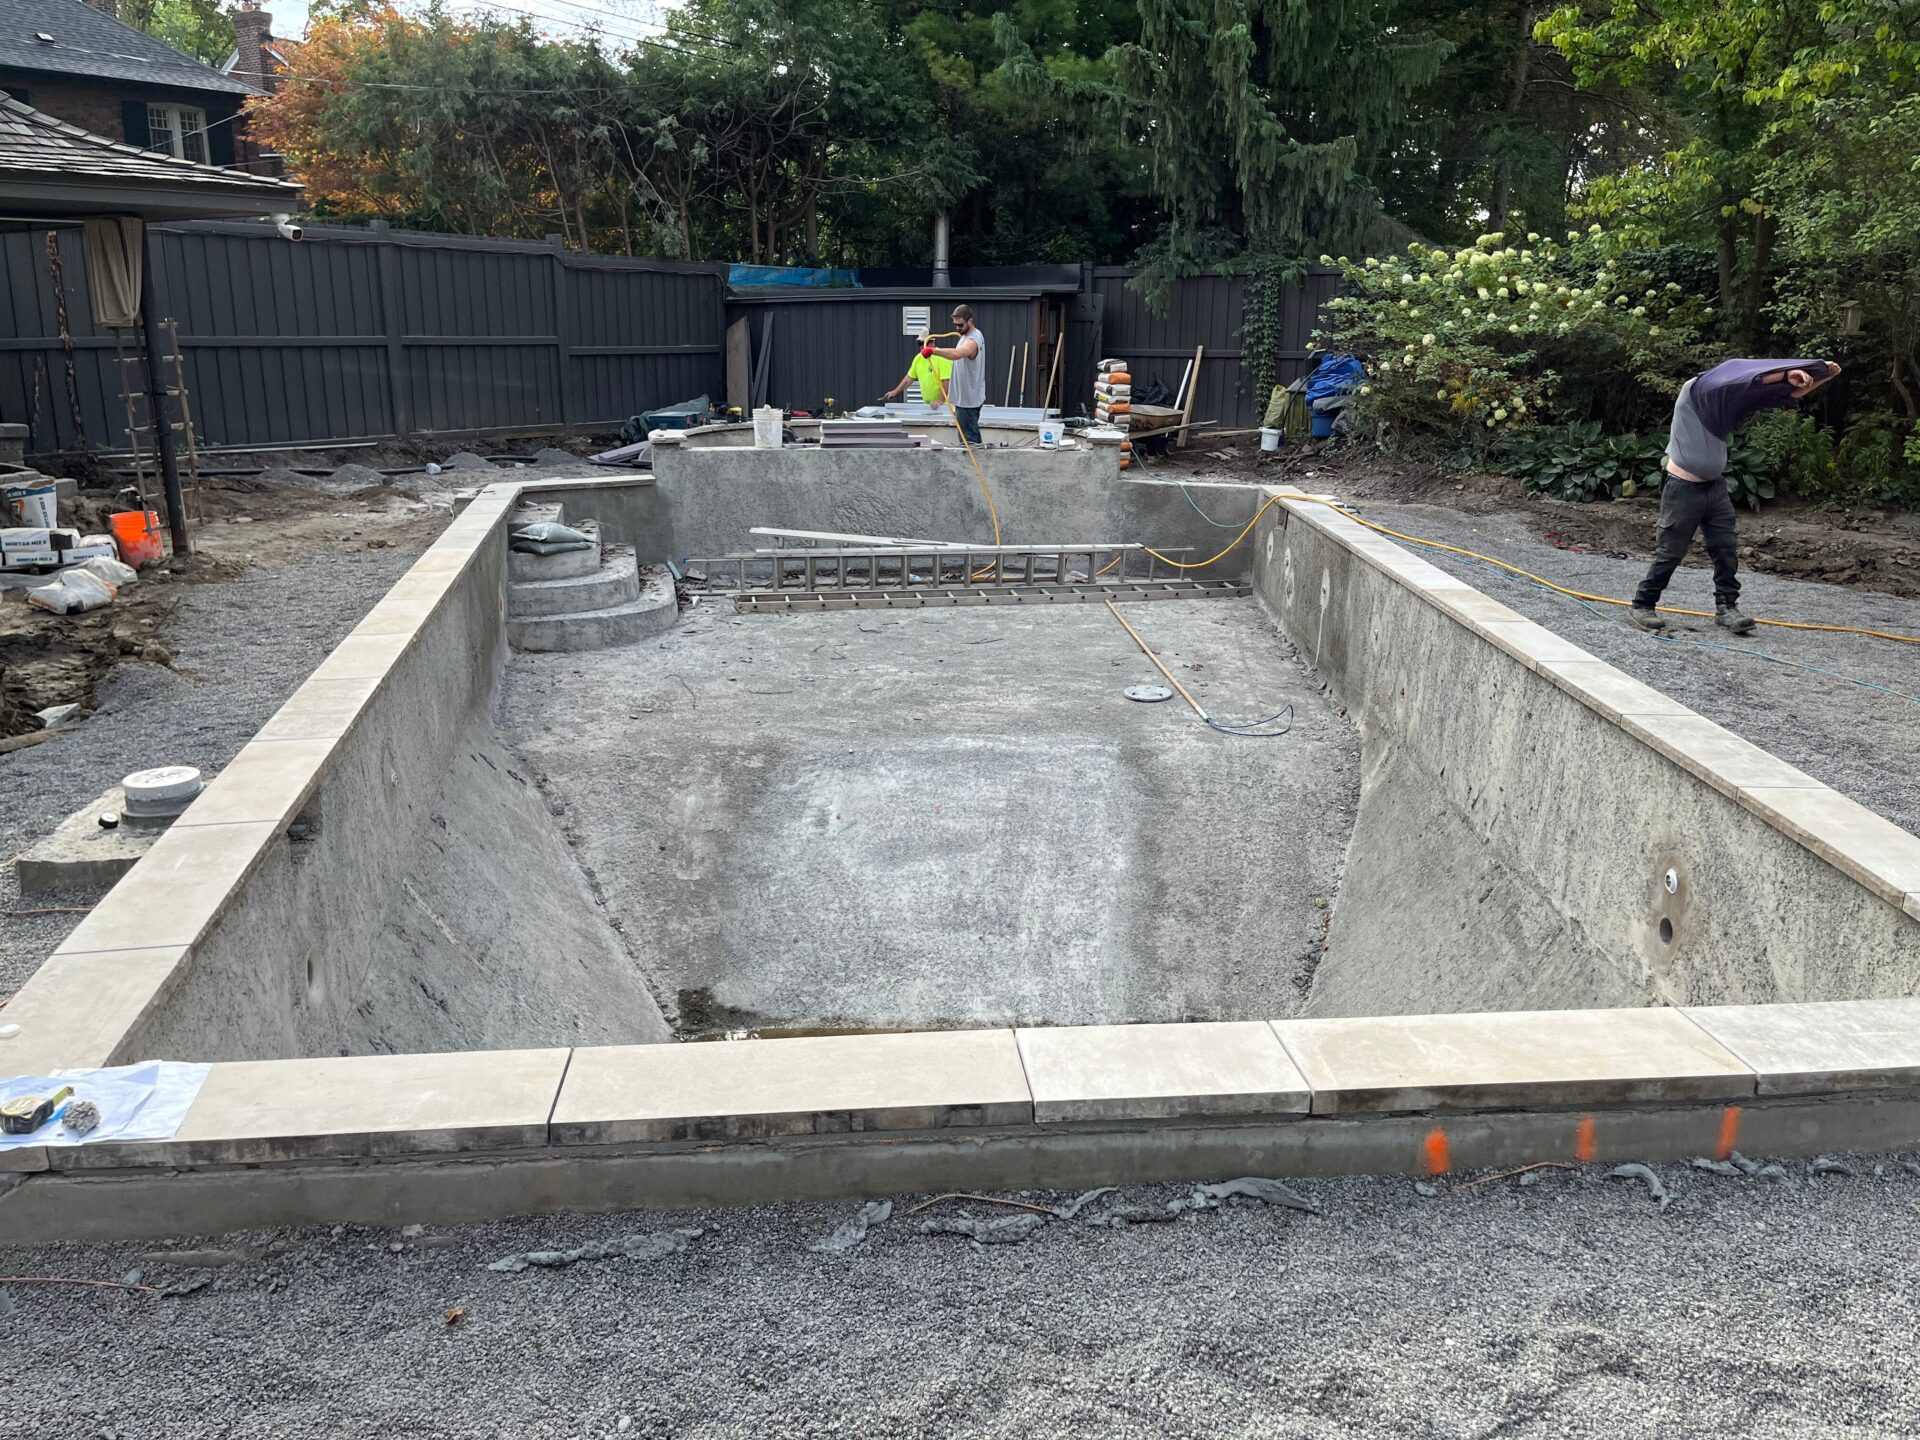 An unfinished swimming pool with two people working on the site. Construction materials are visible, and the pool is set in a backyard.